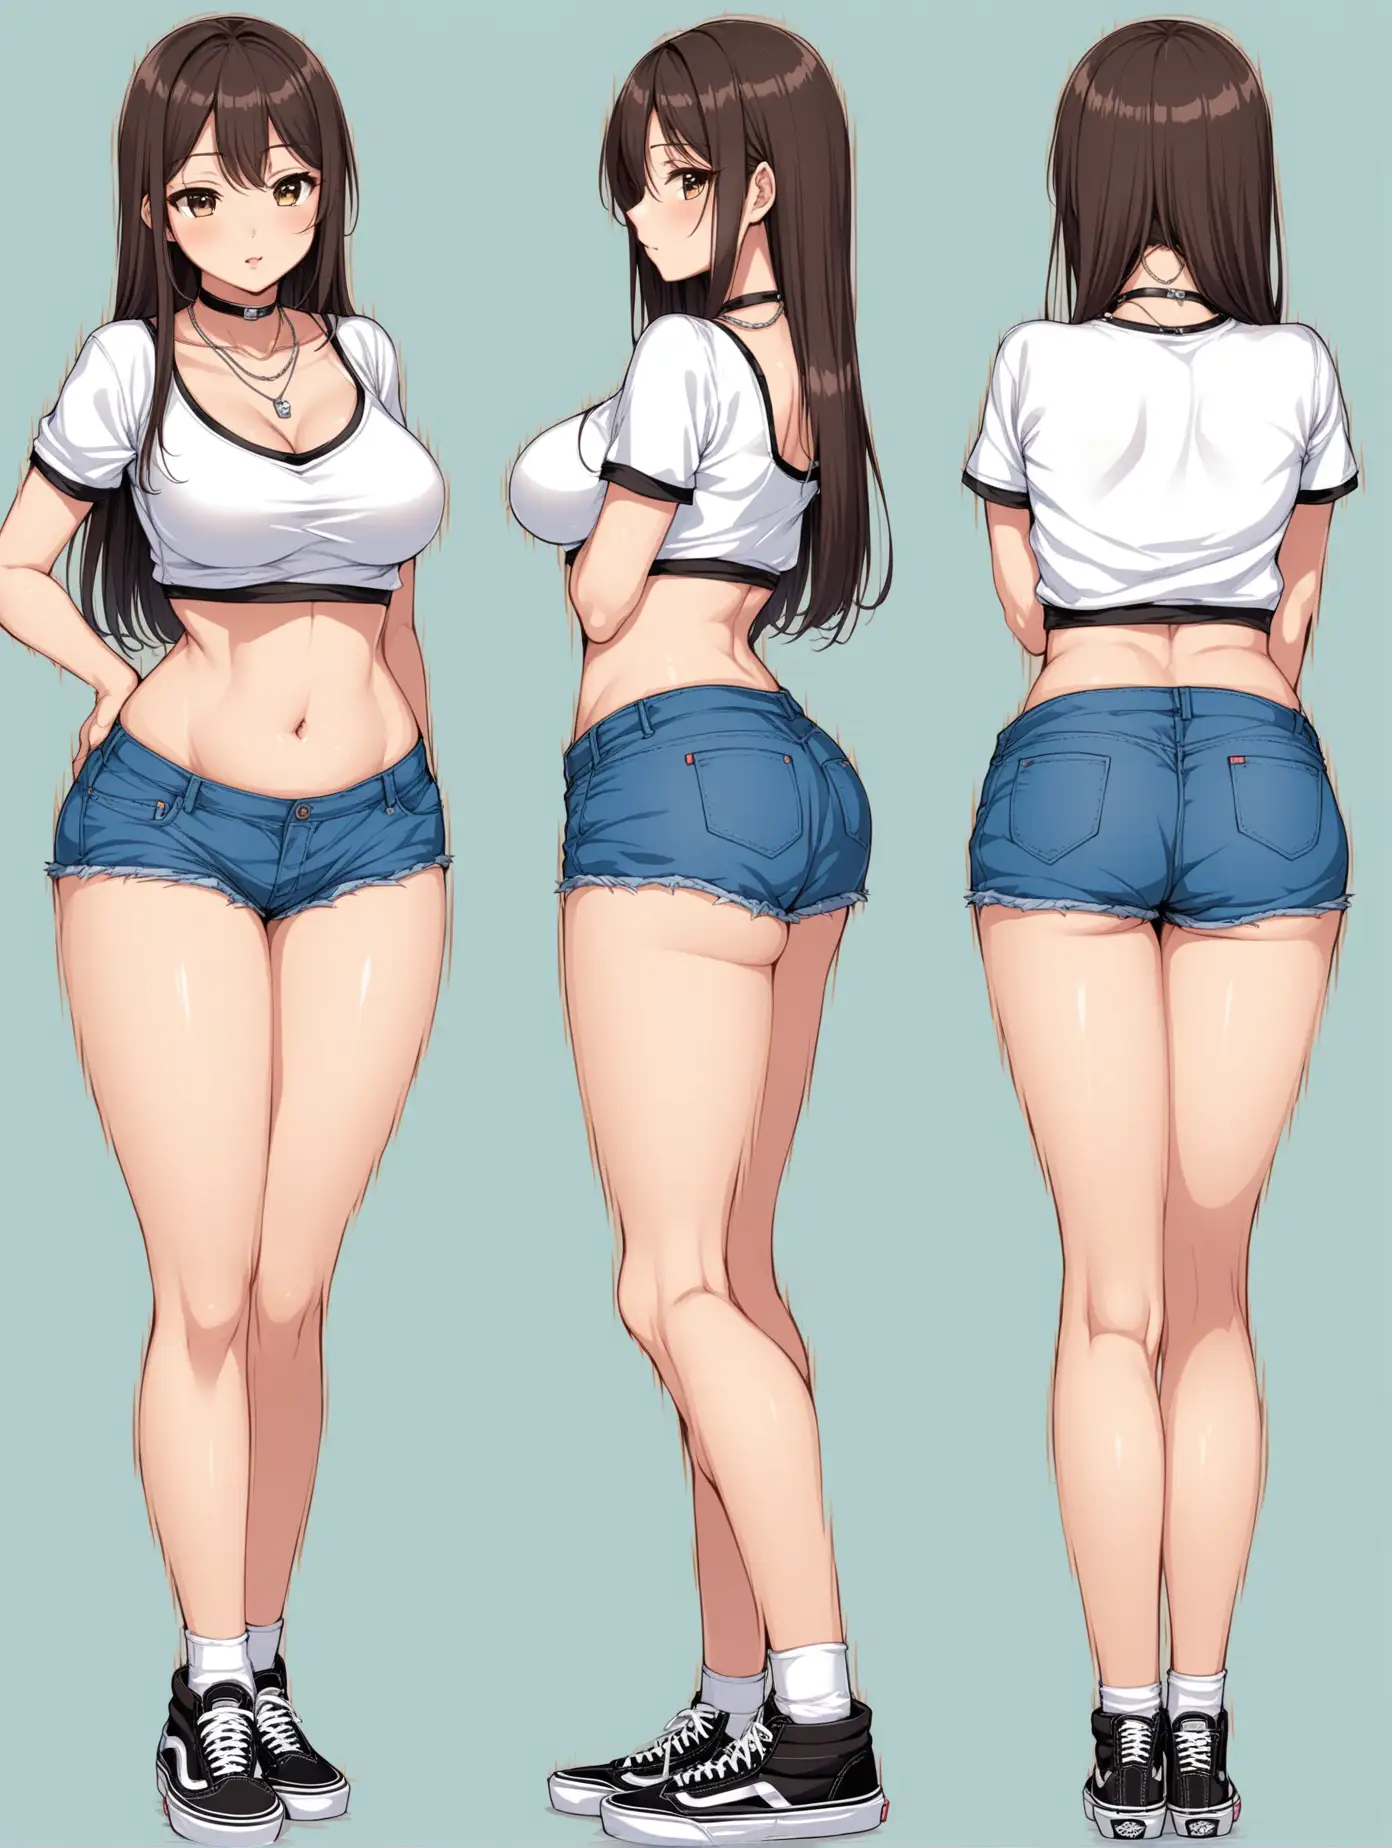 Image: Sensual anime girl. 
Features: Front, latteral and backside views, standing pose.
Body features: brunette, taller, big hips, small breastz
Wears on: Shirt, Stockings Eras Vans sneakers, jorts, choker necklace.